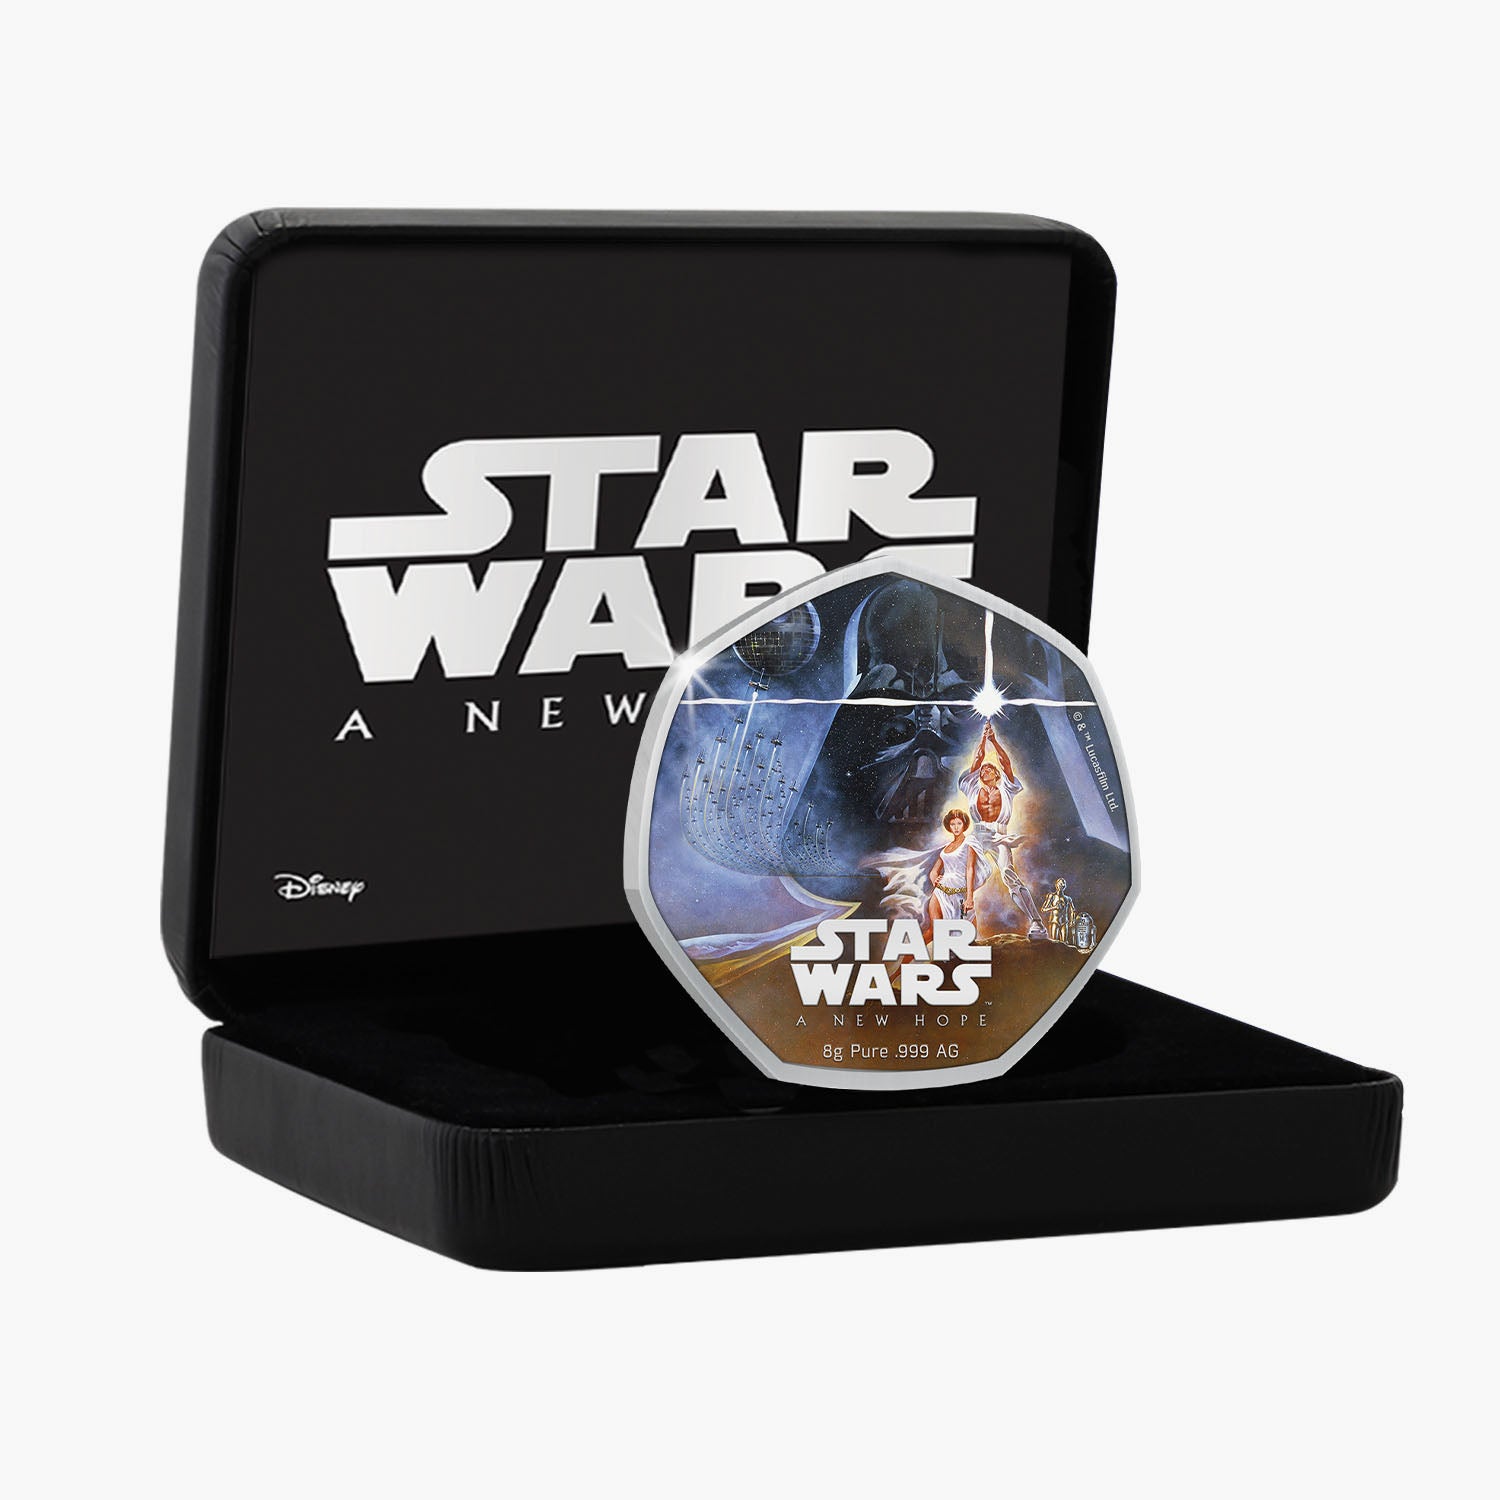 The Star Wars 45th Anniversary A New Hope Solid Silver Coin